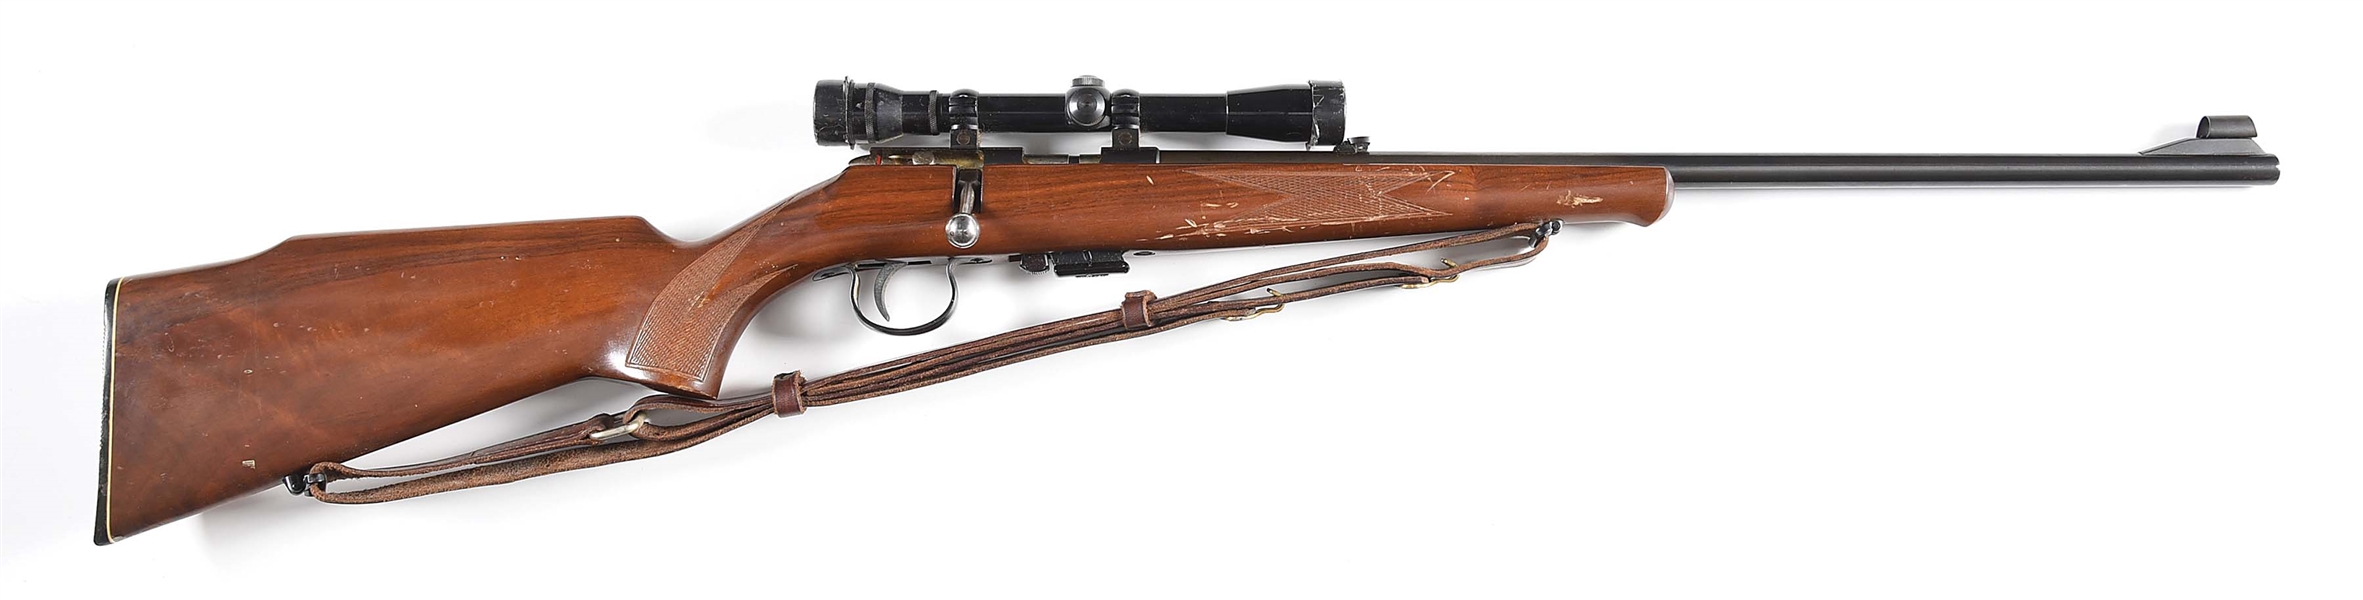 (C) ANSCHUTZ MODEL 184SPORTER BOLT ACTION RIFLE WITH REDFIELD SCOPE.